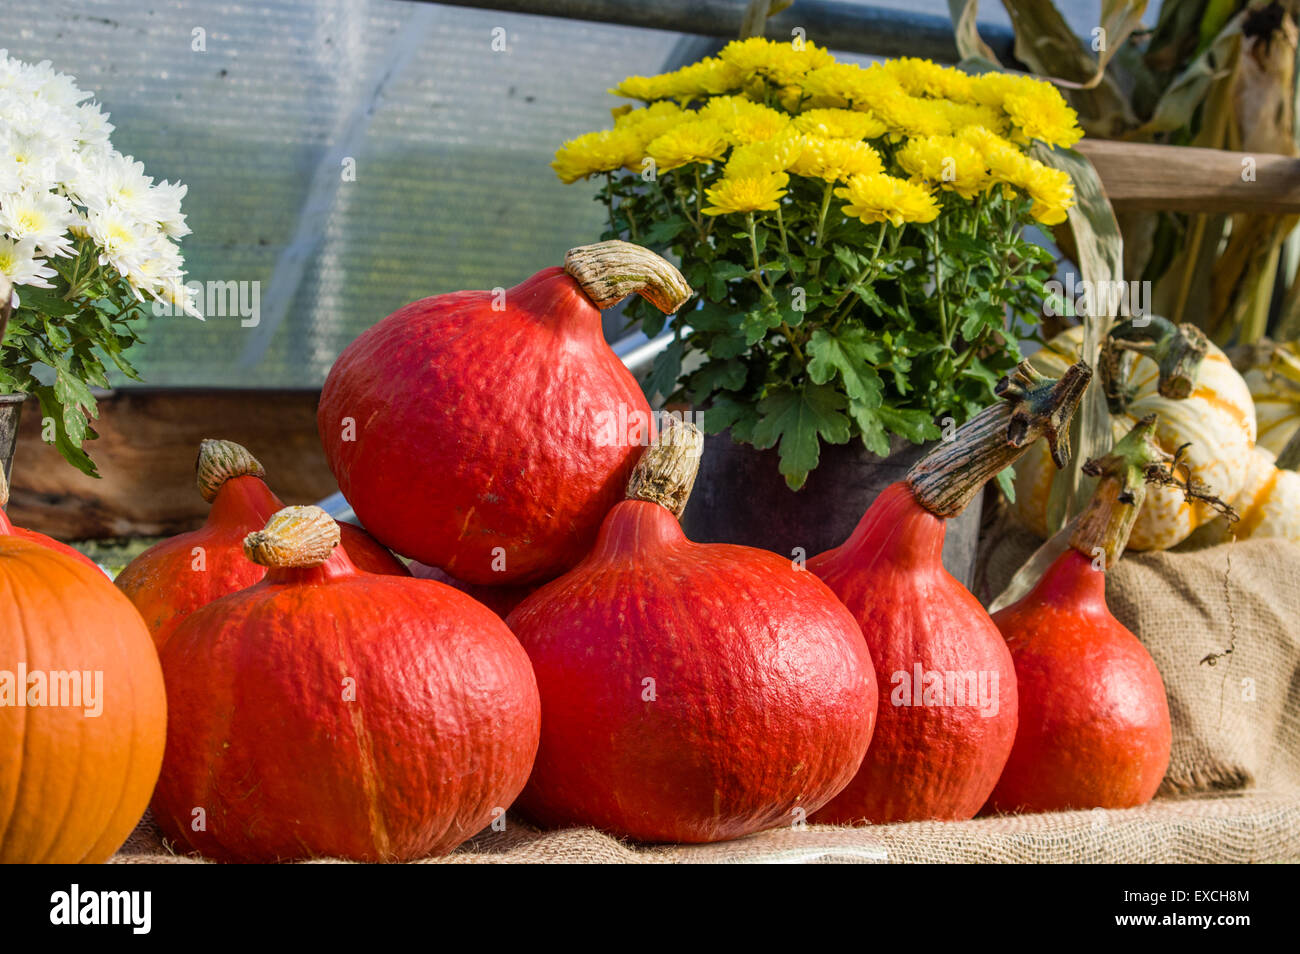 Fall festival display of flowers and red squash Stock Photo